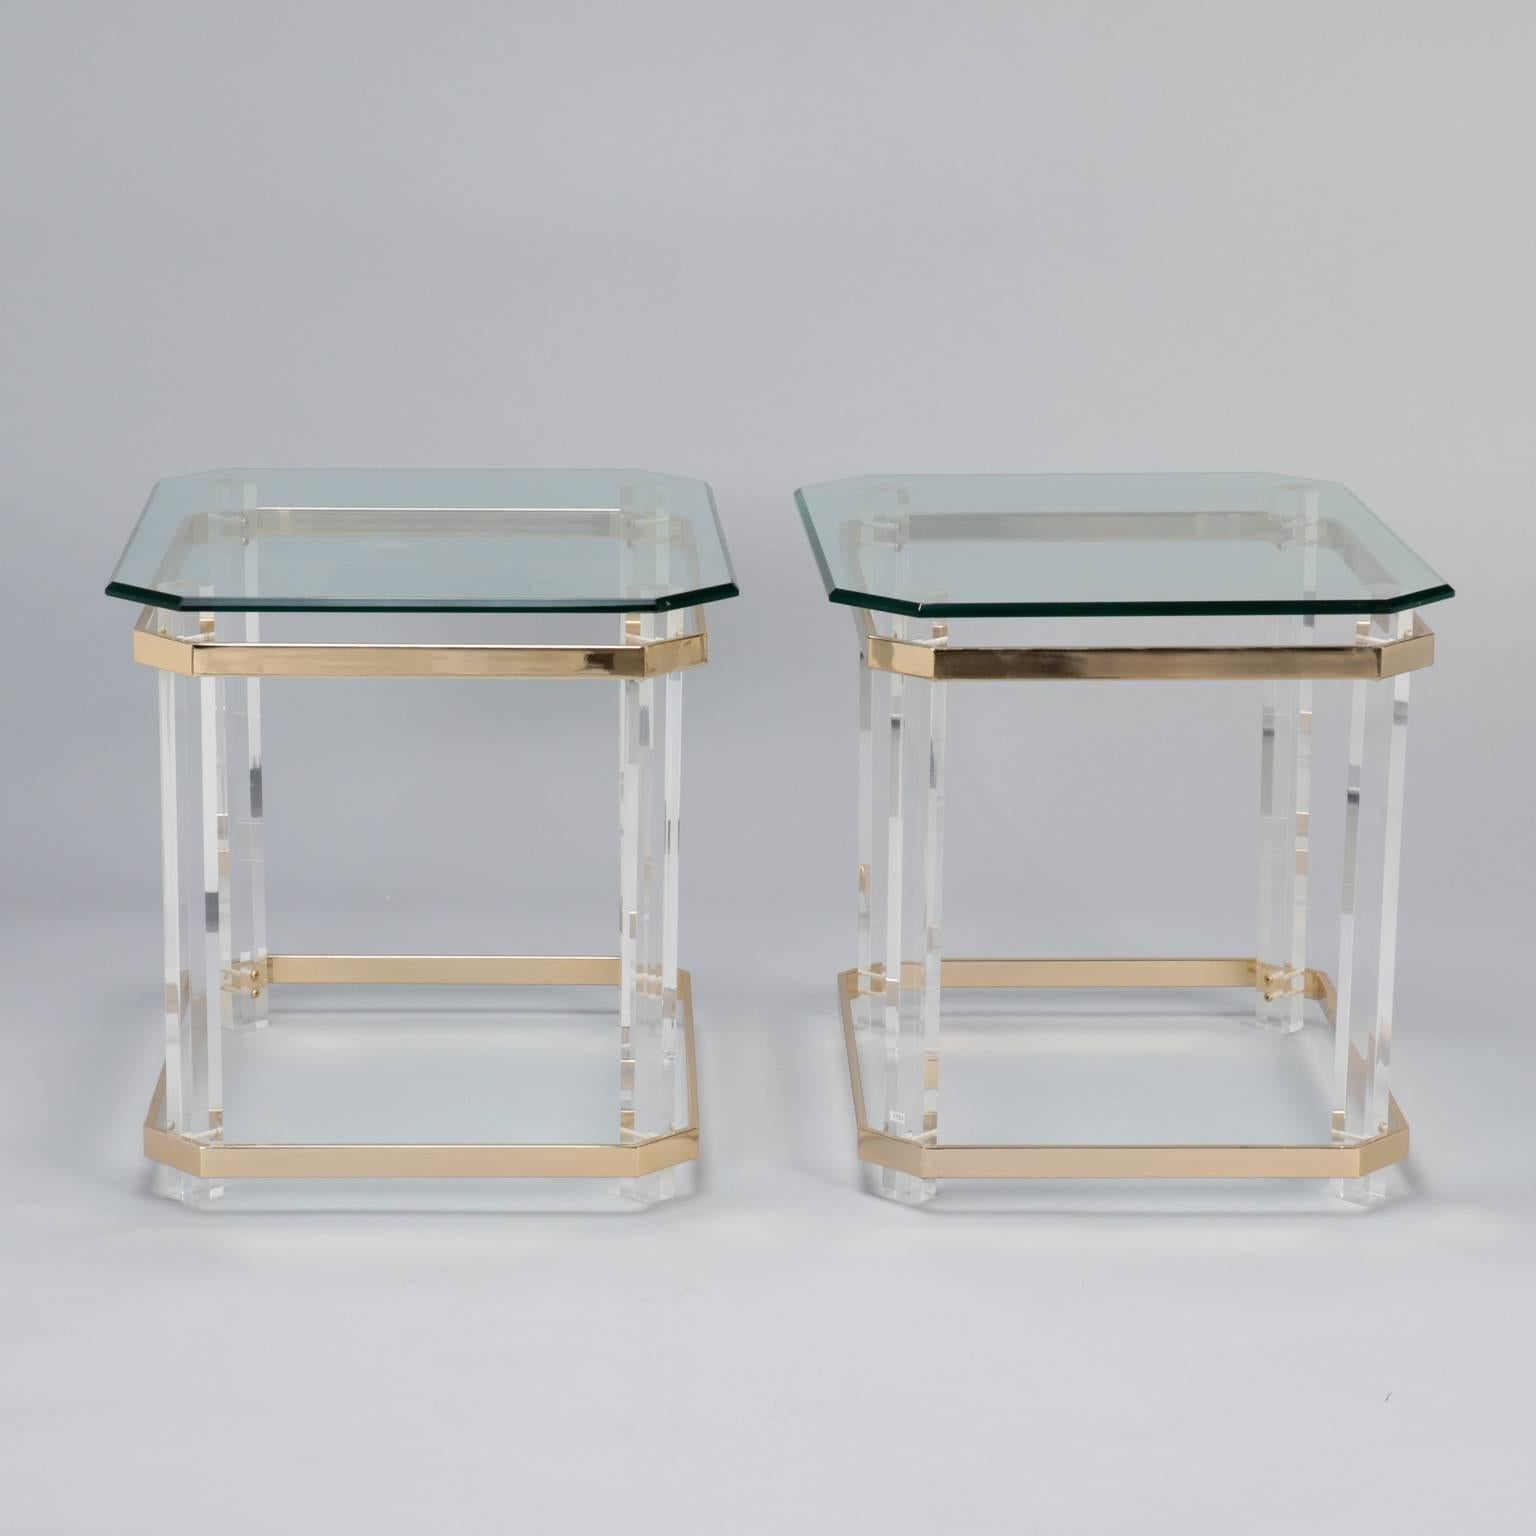 Circa 1970s pair of side or end tables with beveled edge glass tops, clear lucite legs and flat brass plated banding at base and aprons. Excellent vintage condition with very little visible wear. Sold and priced as a pair. 